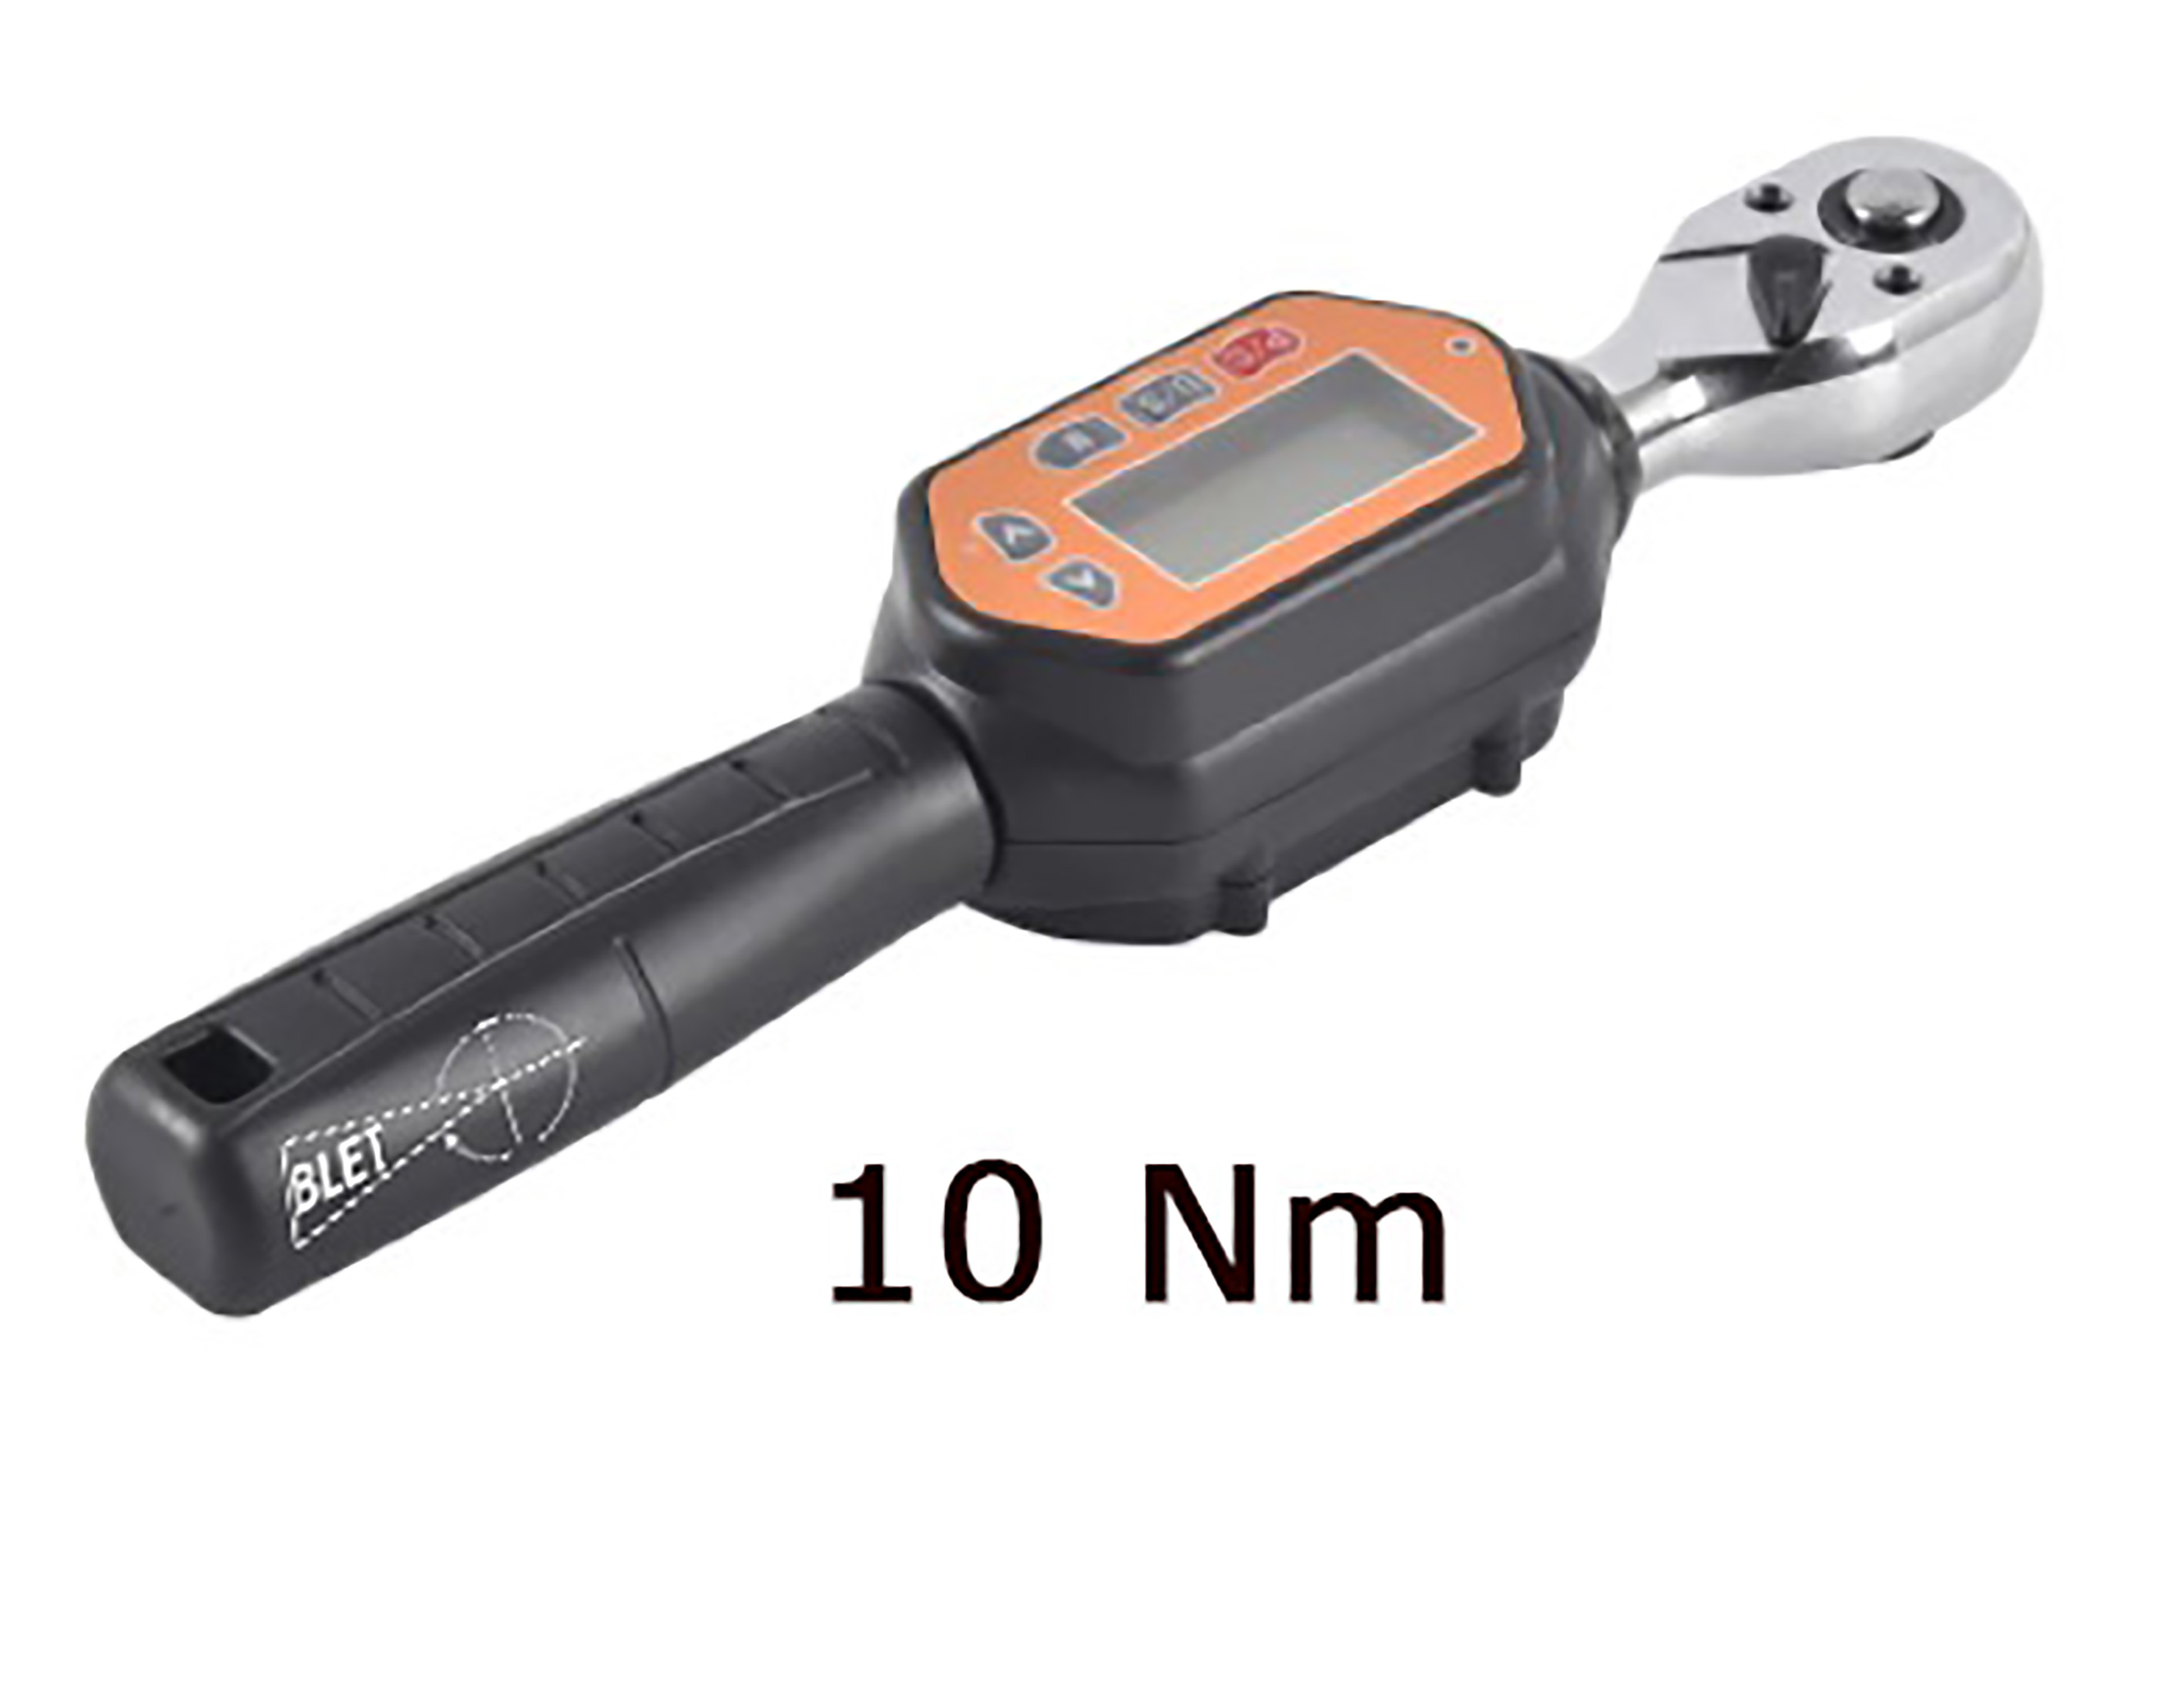 COMPACT DIGITAL TORQUE WRENCH 0,3-10 Nm READING 0,01 Nm SIZE 1/4" BLET<br>Ref : CLET5-CDM01014